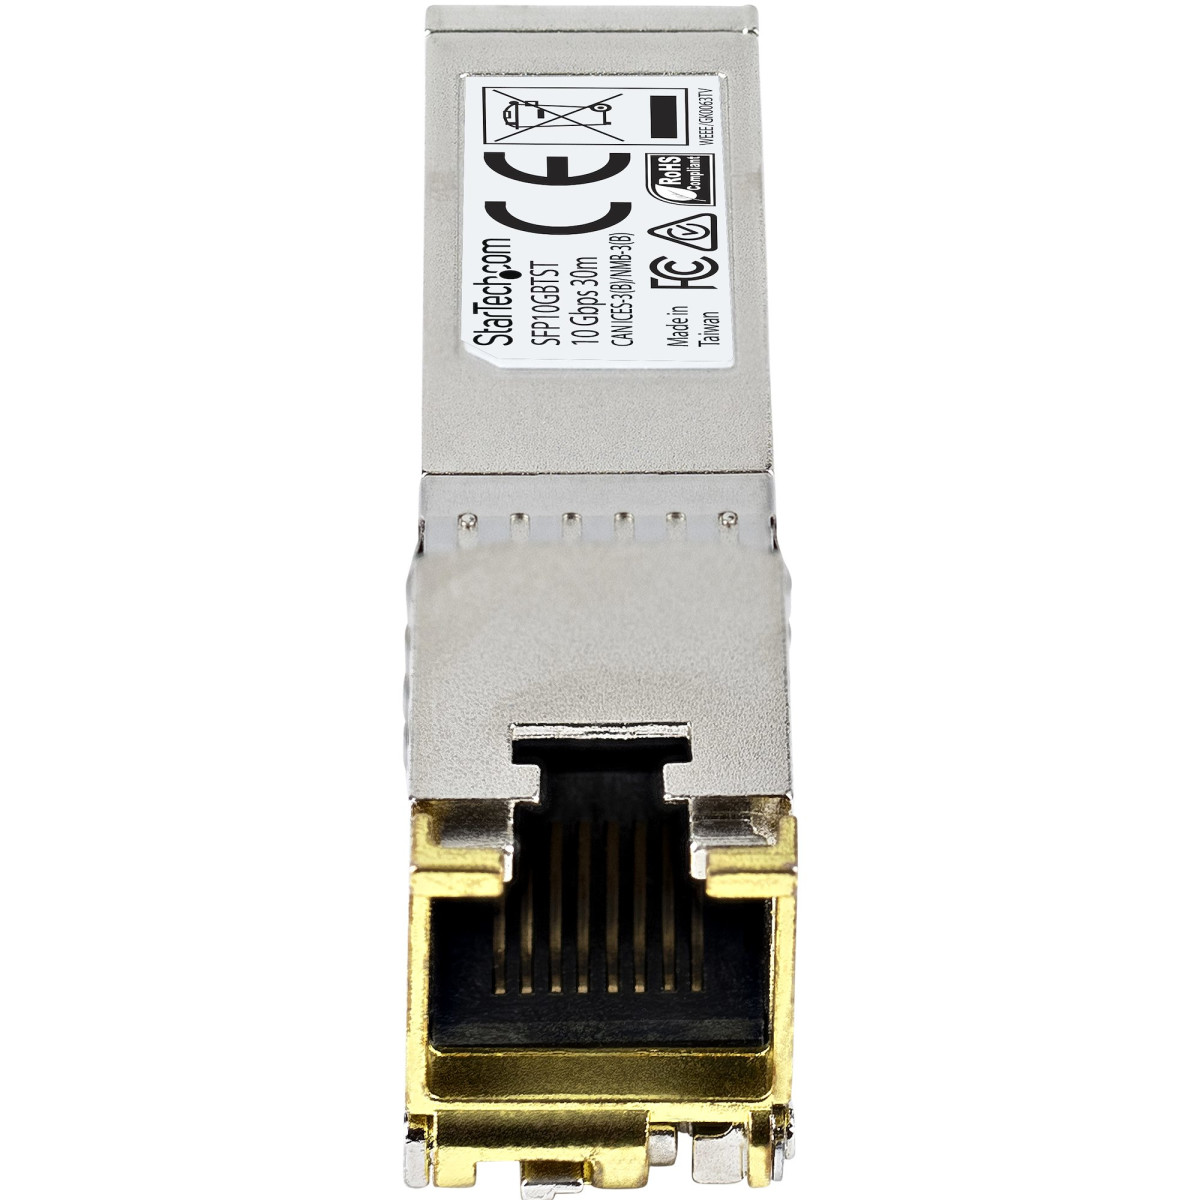 10GBase-T SFP+ Transceiver -10G Copper